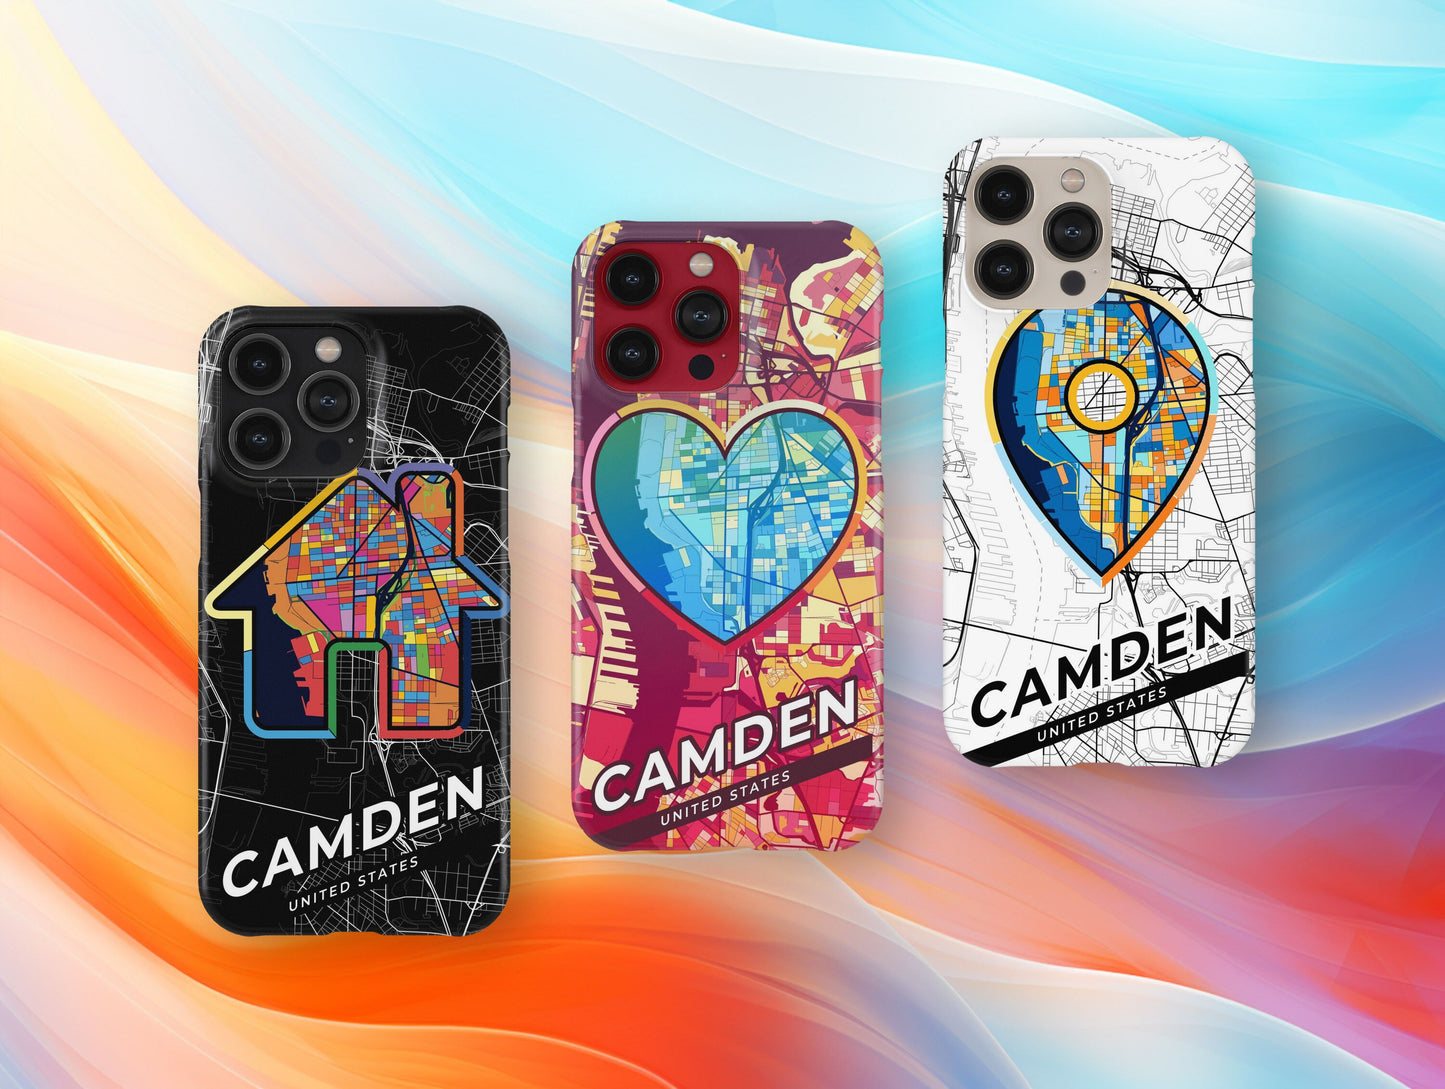 Camden New Jersey slim phone case with colorful icon. Birthday, wedding or housewarming gift. Couple match cases.